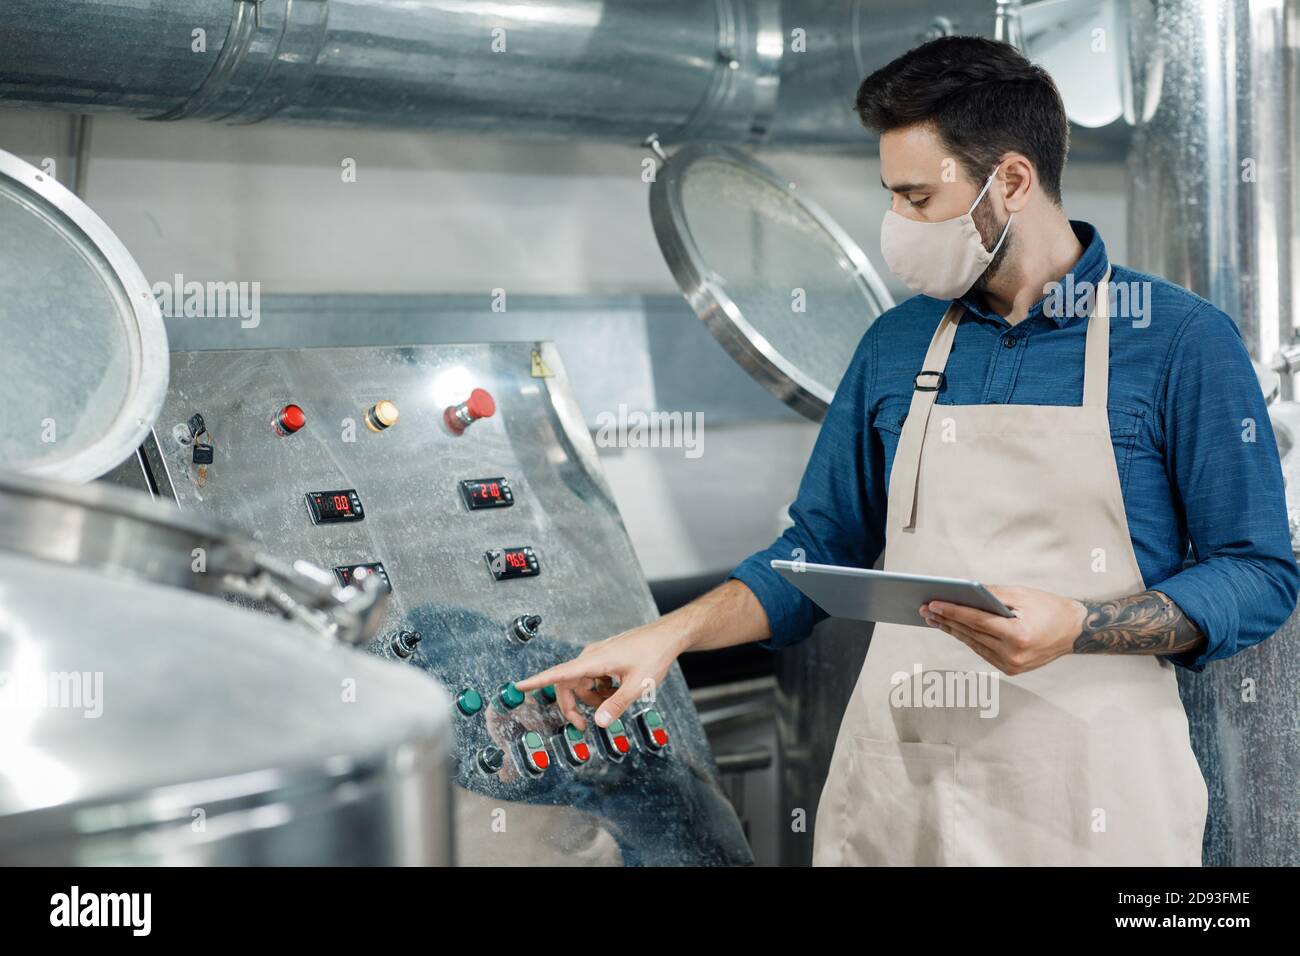 Management of brewery or small industrial plant with modern technology Stock Photo